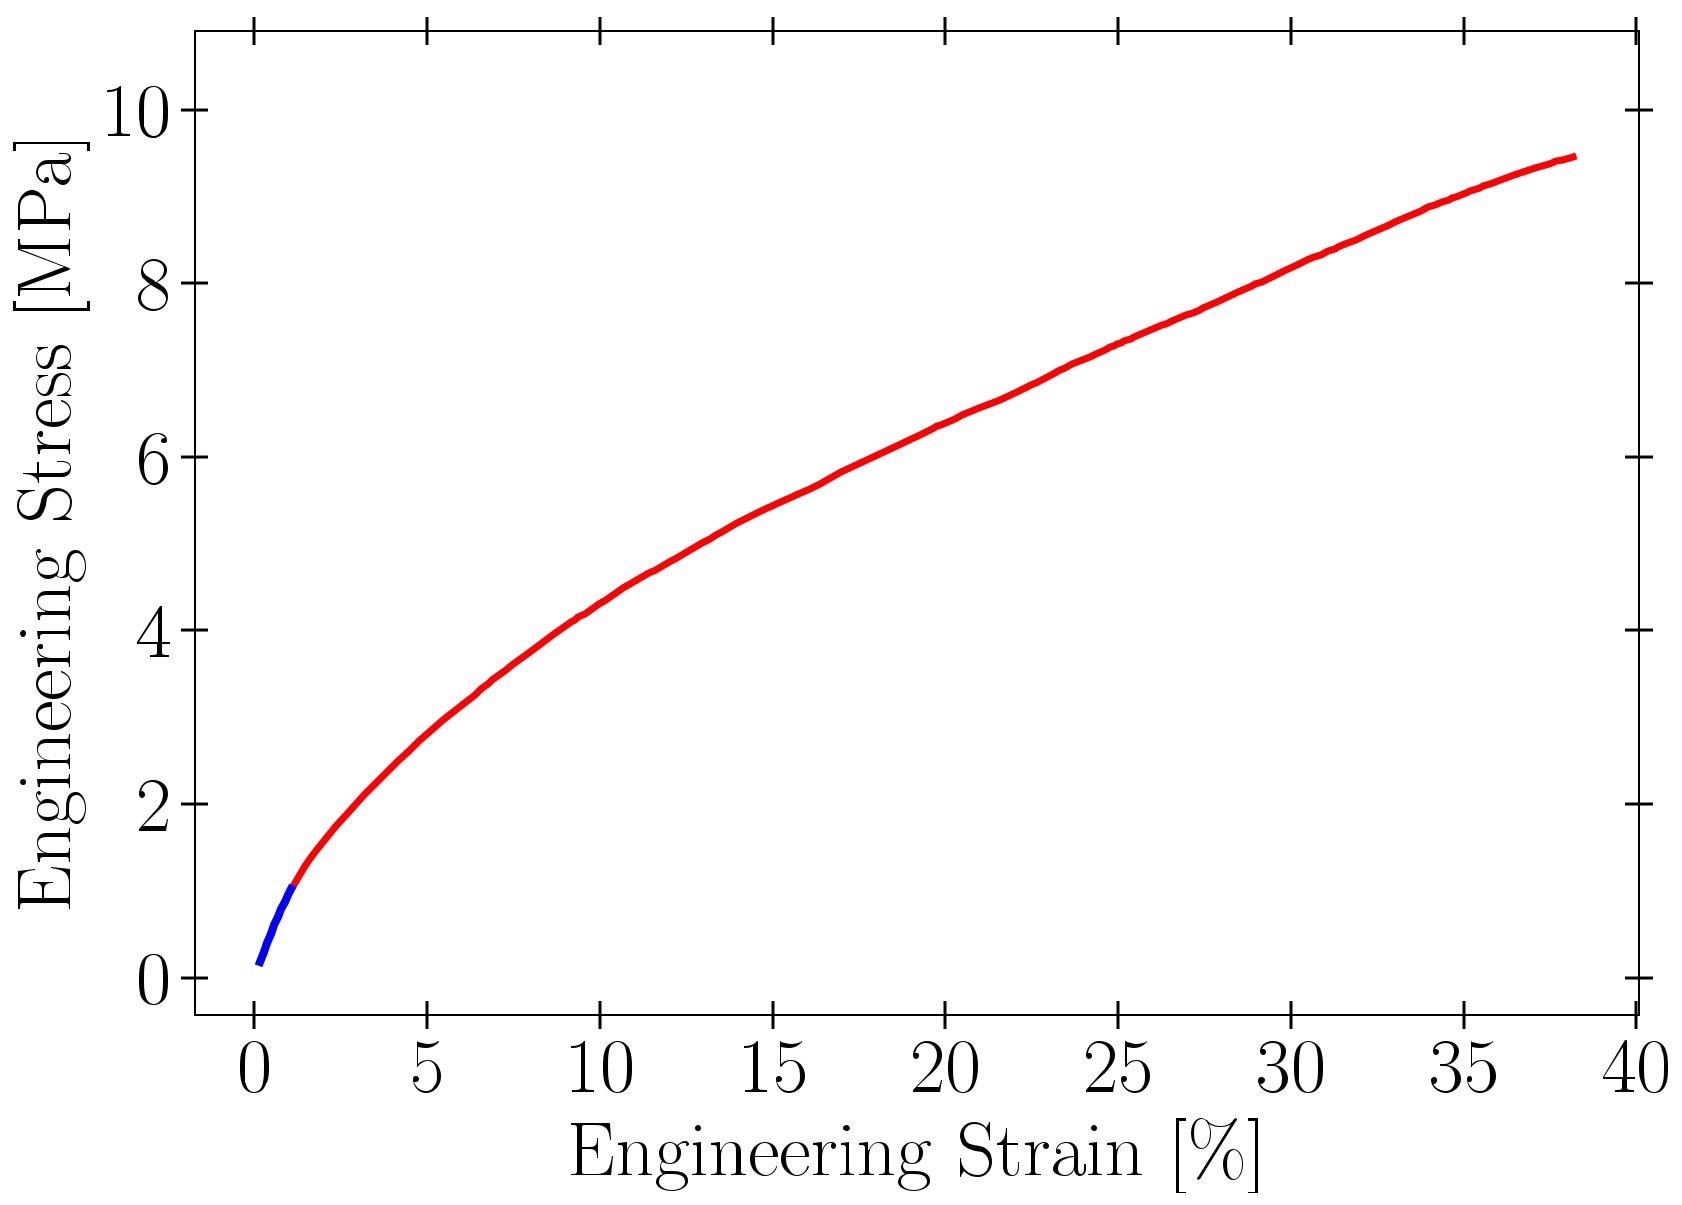 Average engineering stress as a function of engineering strain for a concentration of 2% agar and 1.25% glycerin. The blue line represents the linear portion or elastic zone, and the grey shaded region corresponds to the experimental error.